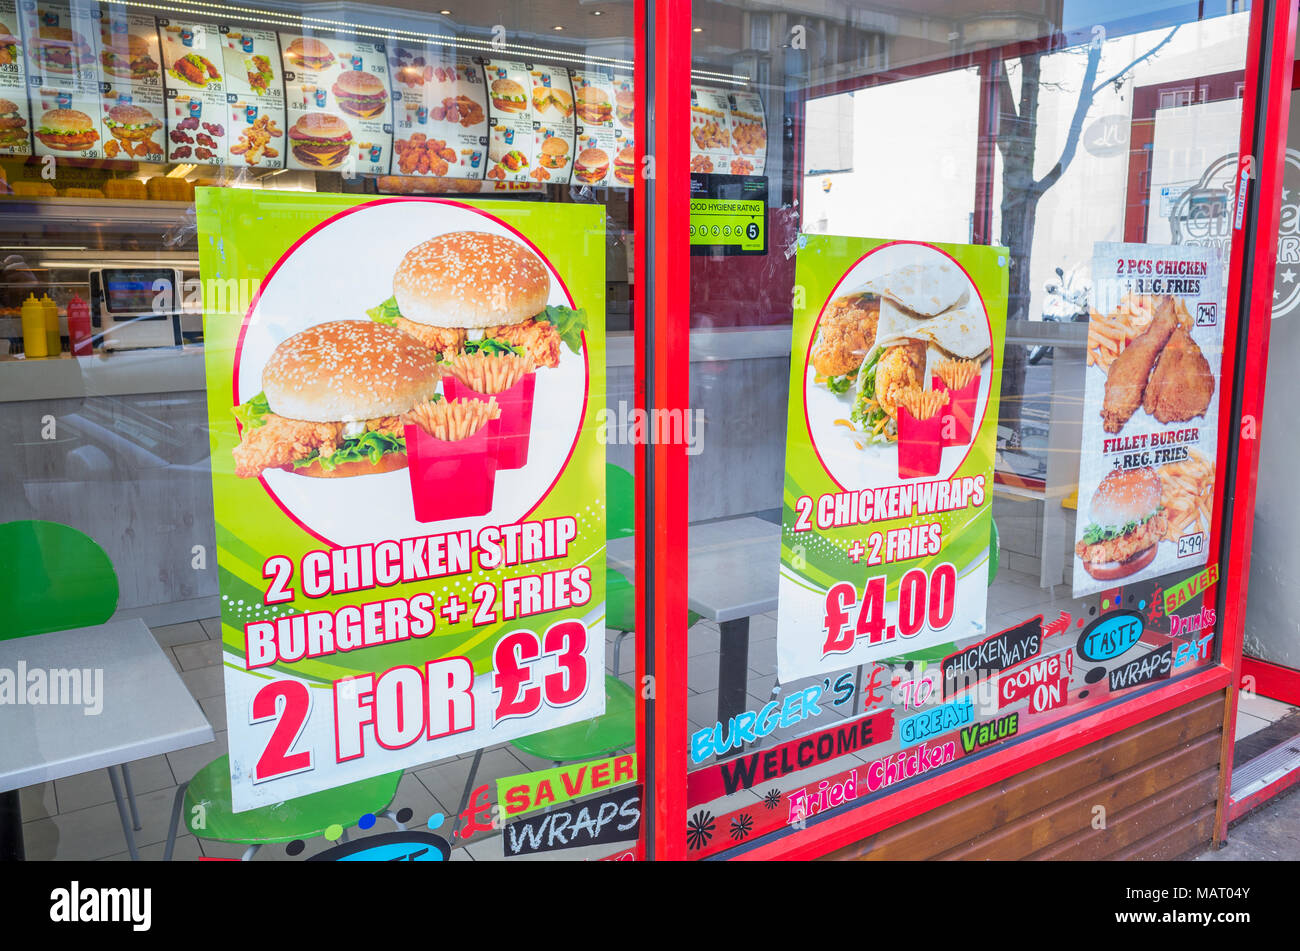 Signs in shop window of a chicken and burger fast food take away, UK, London Stock Photo